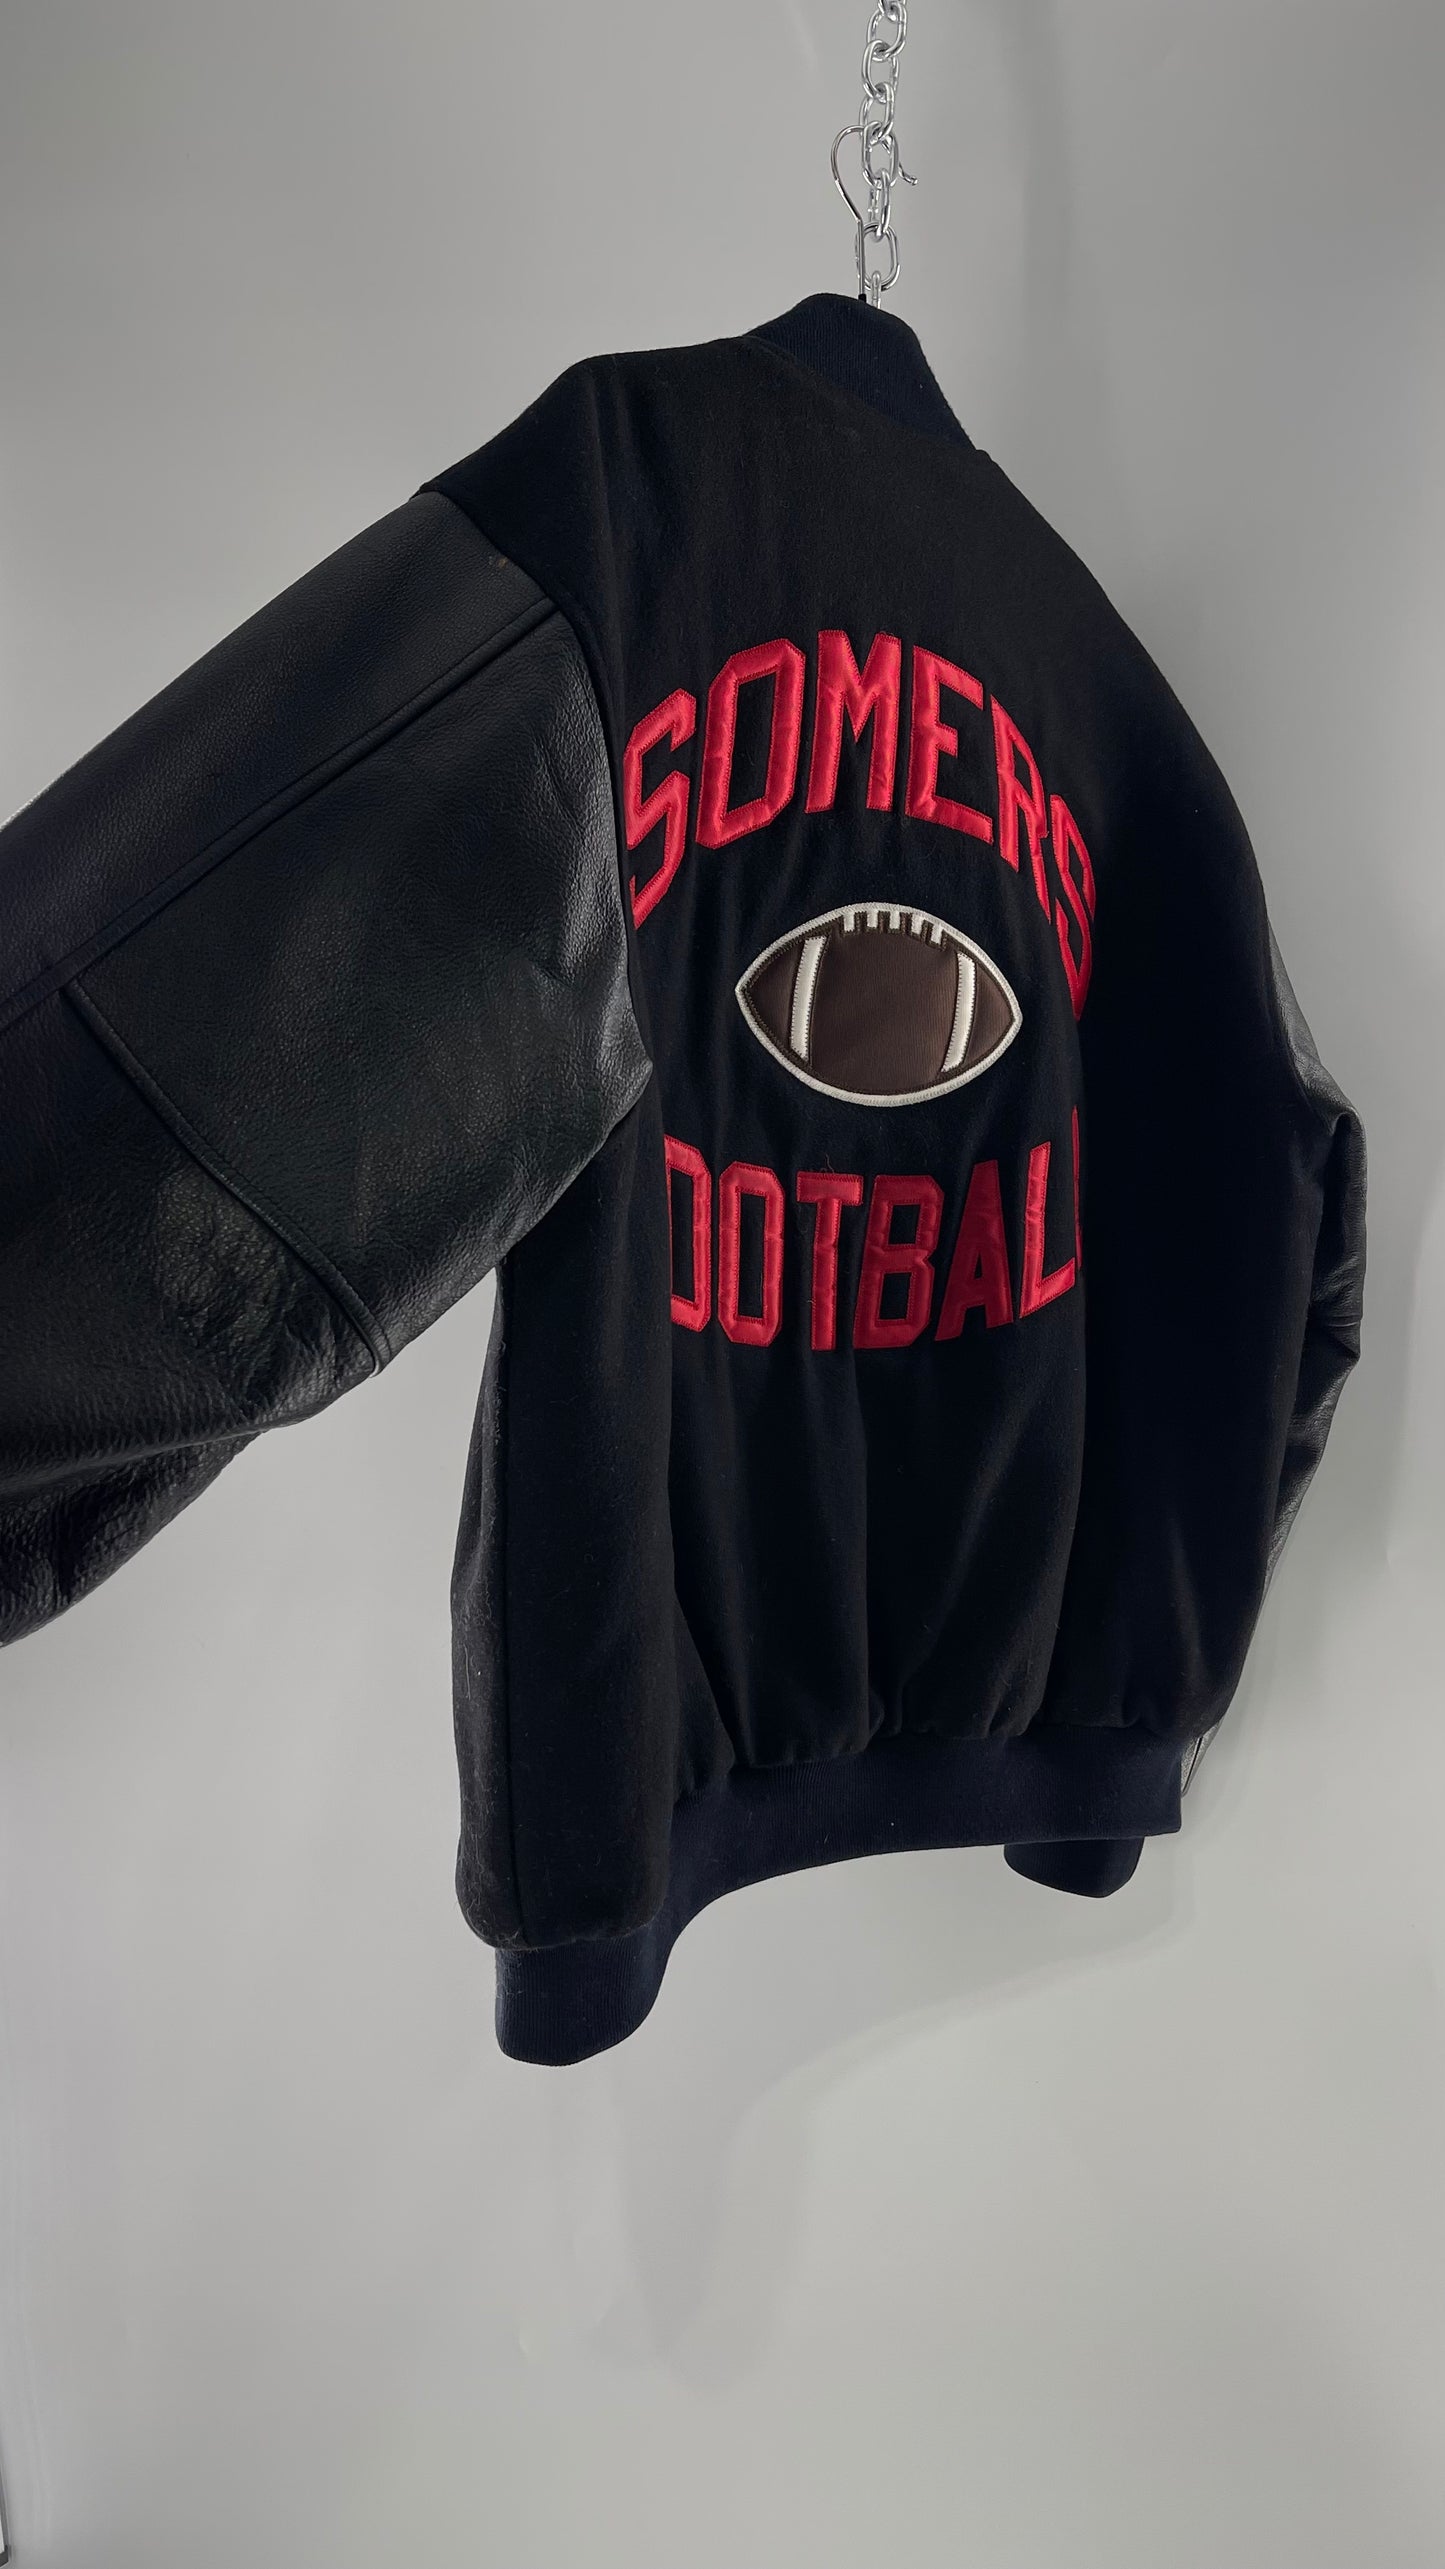 Vintage Somers Football Varsity Jacket with Leather Sleeves “Matt” Embroidery and Red Lettering (XL)